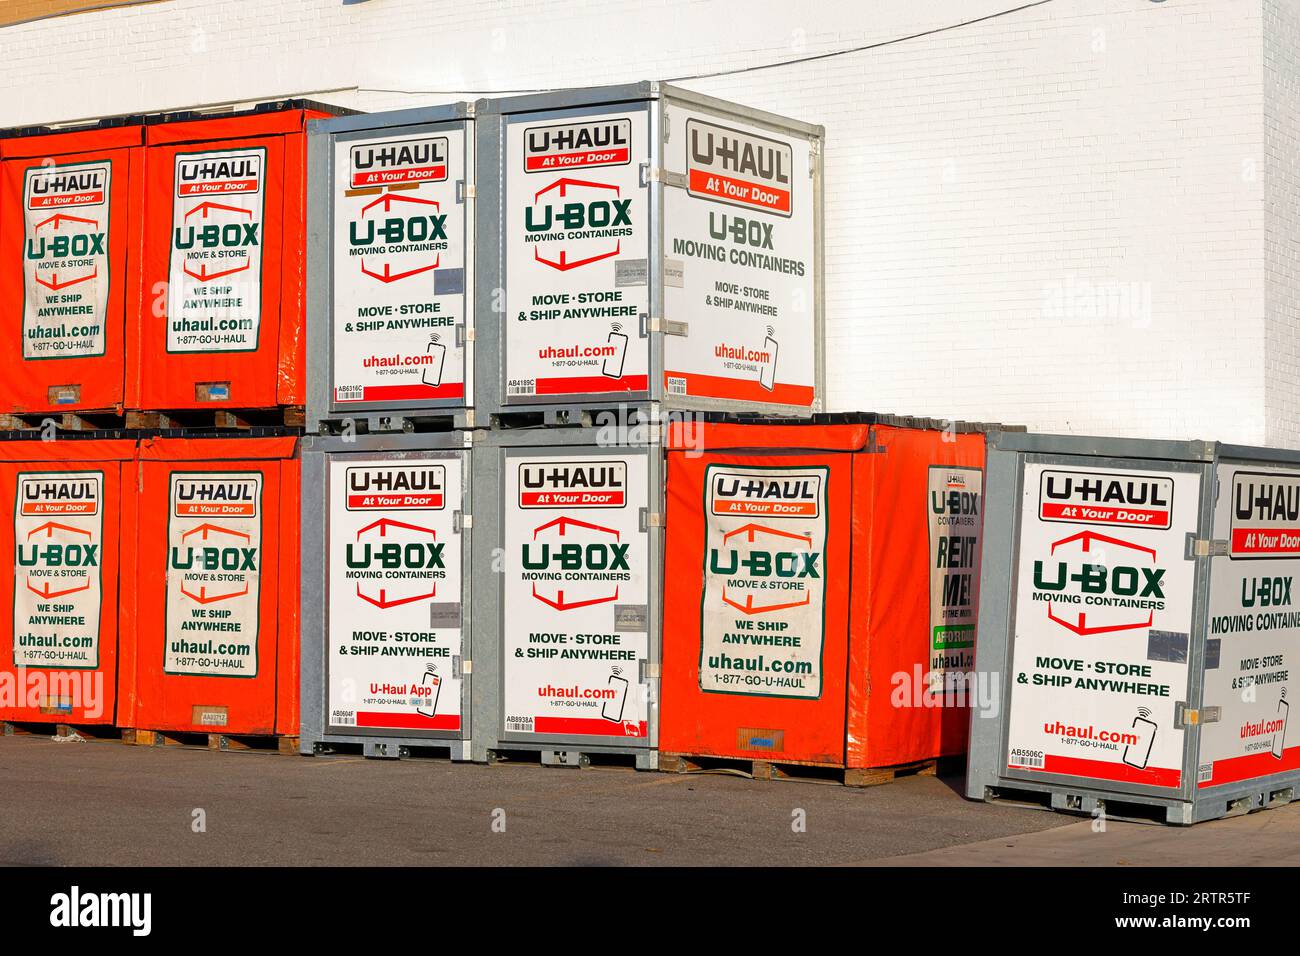 U Haul rental U Box moving containers, shipping containers stacked against a wall. Stock Photo